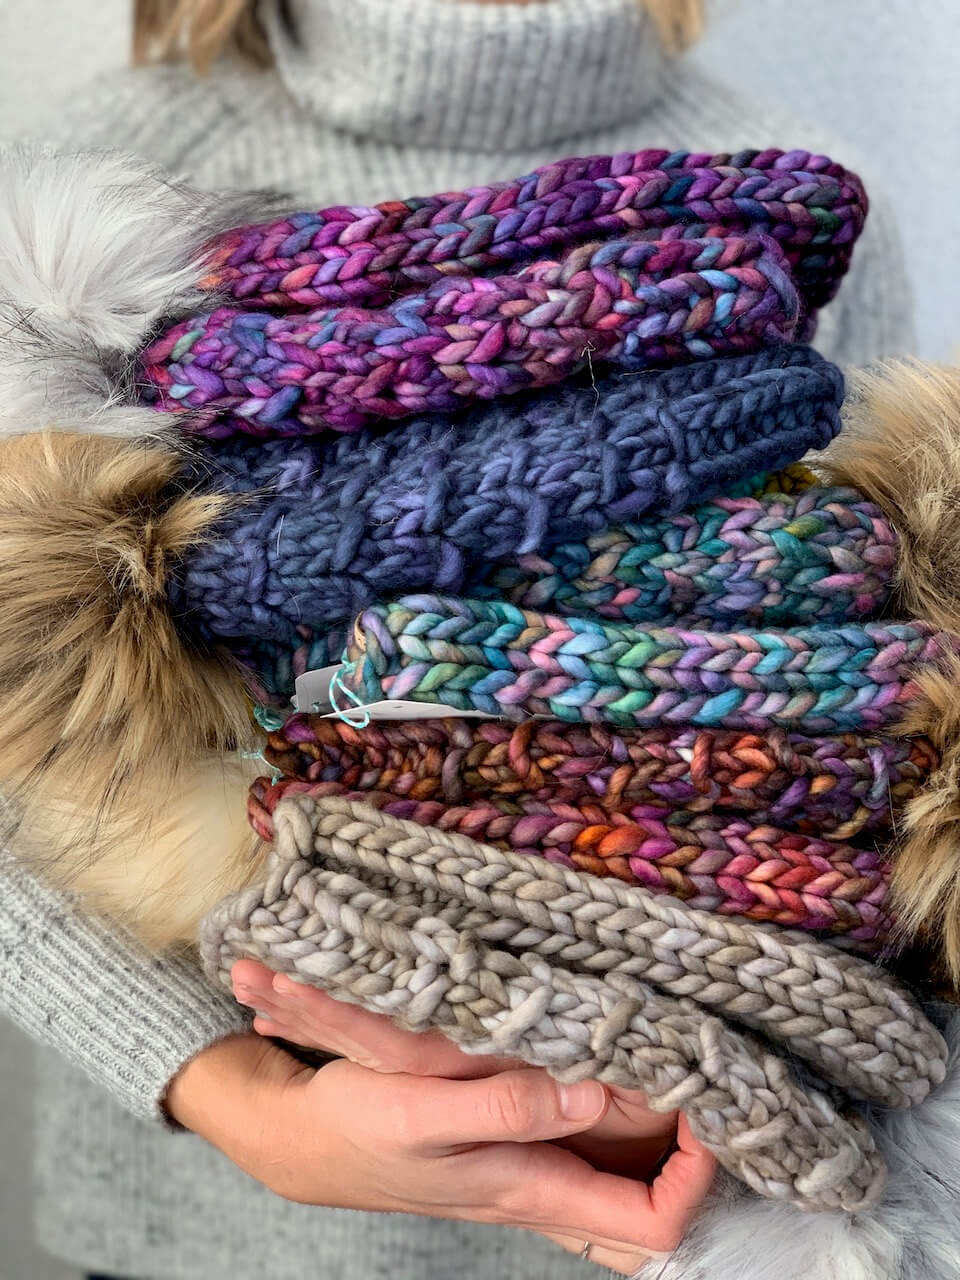 Knit wool hat stack from Woolly Bear